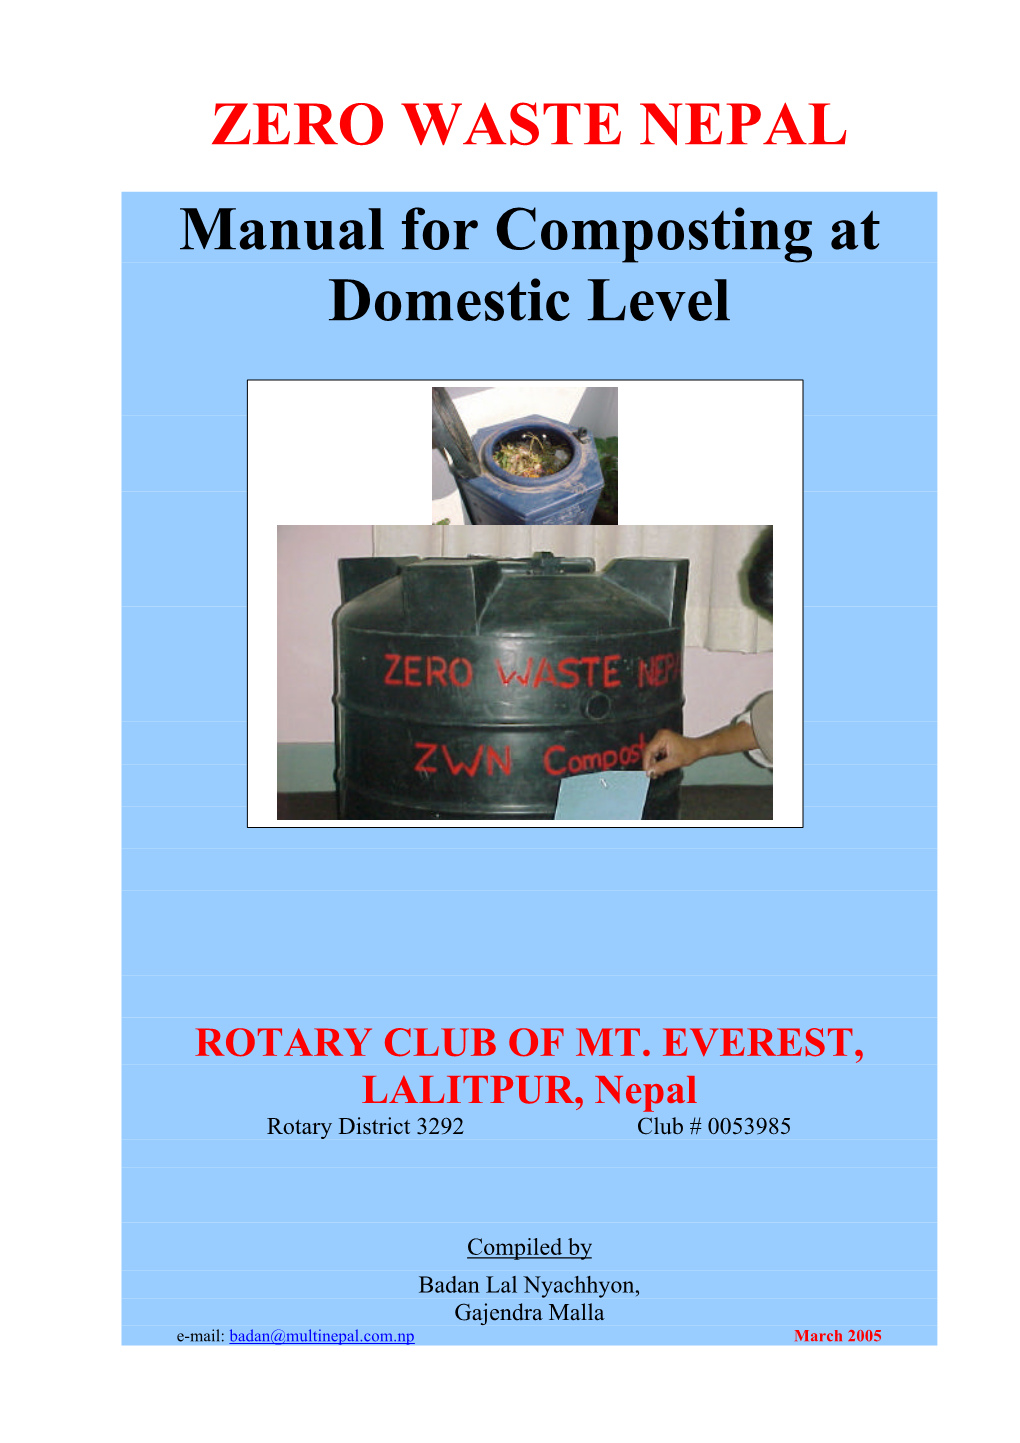 Manual for Domestic Composting